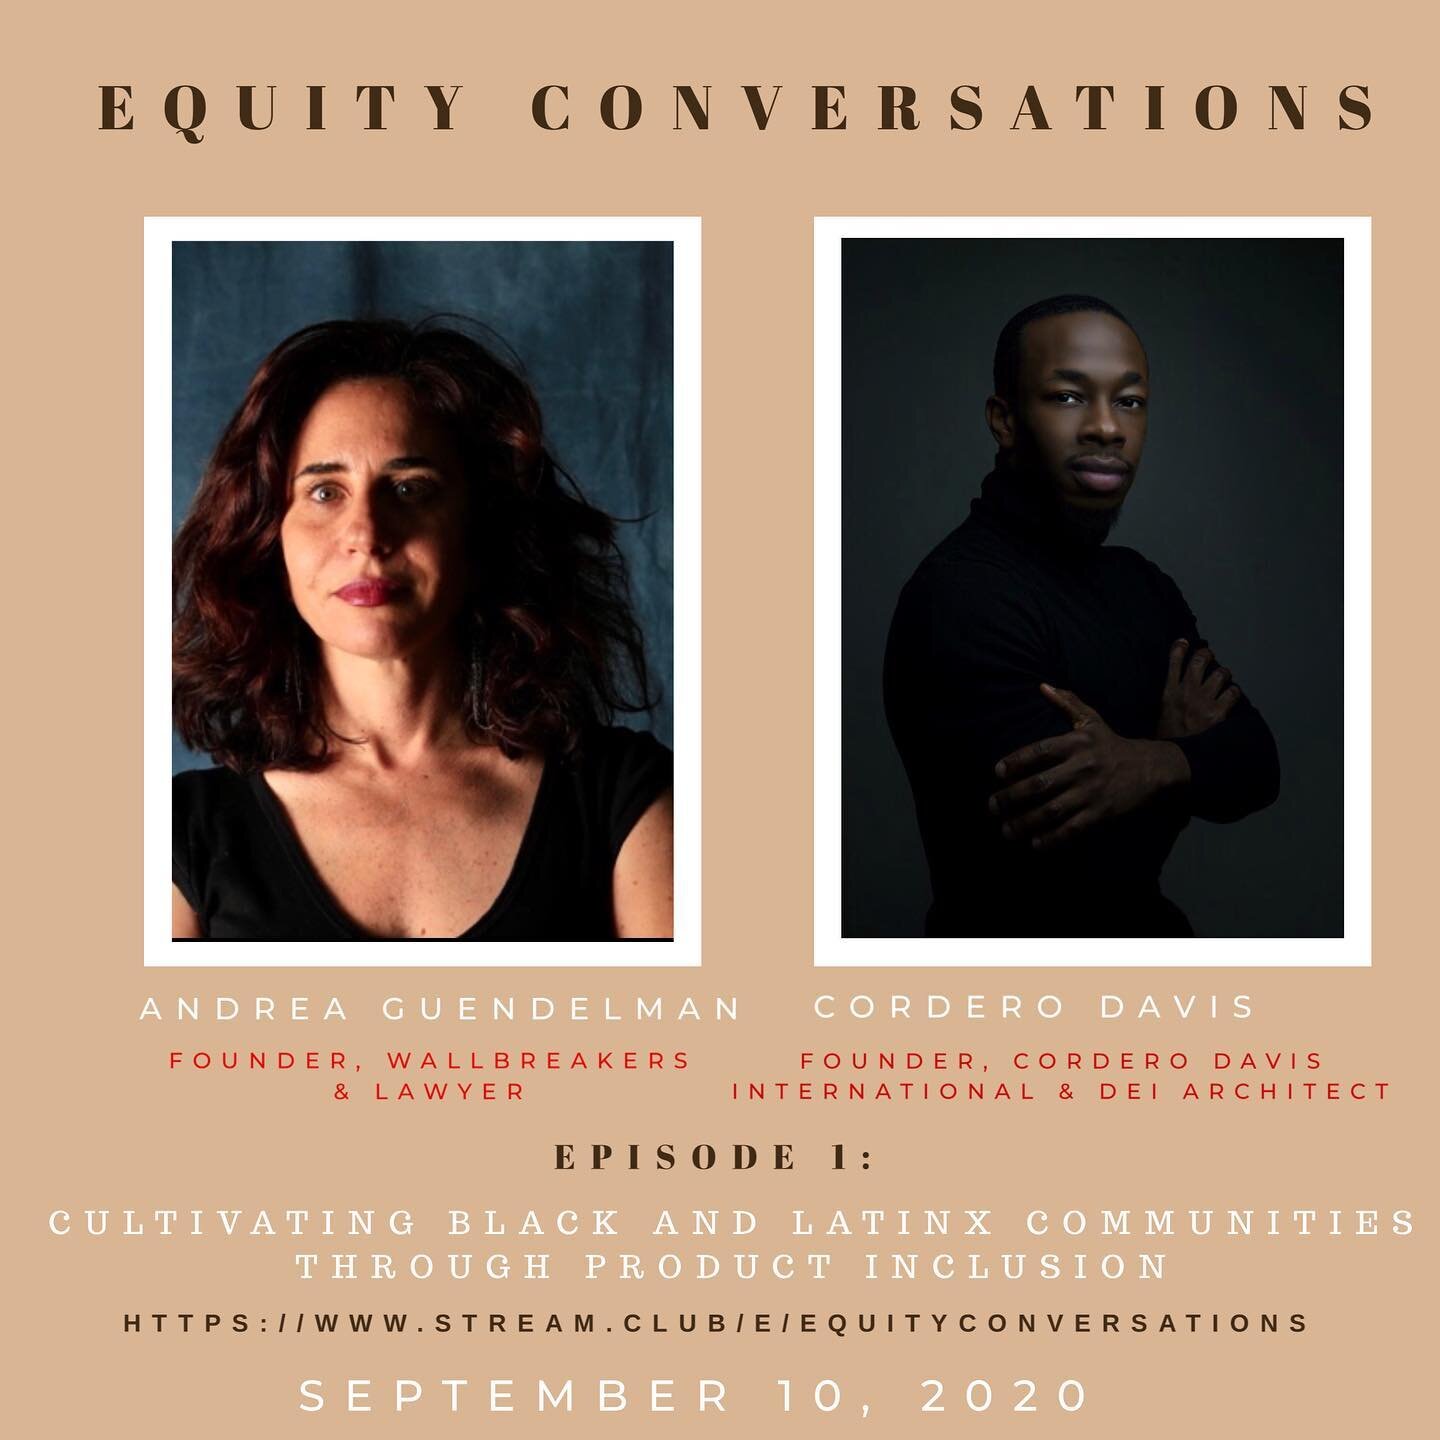 Excited for this #equity Conversatorio